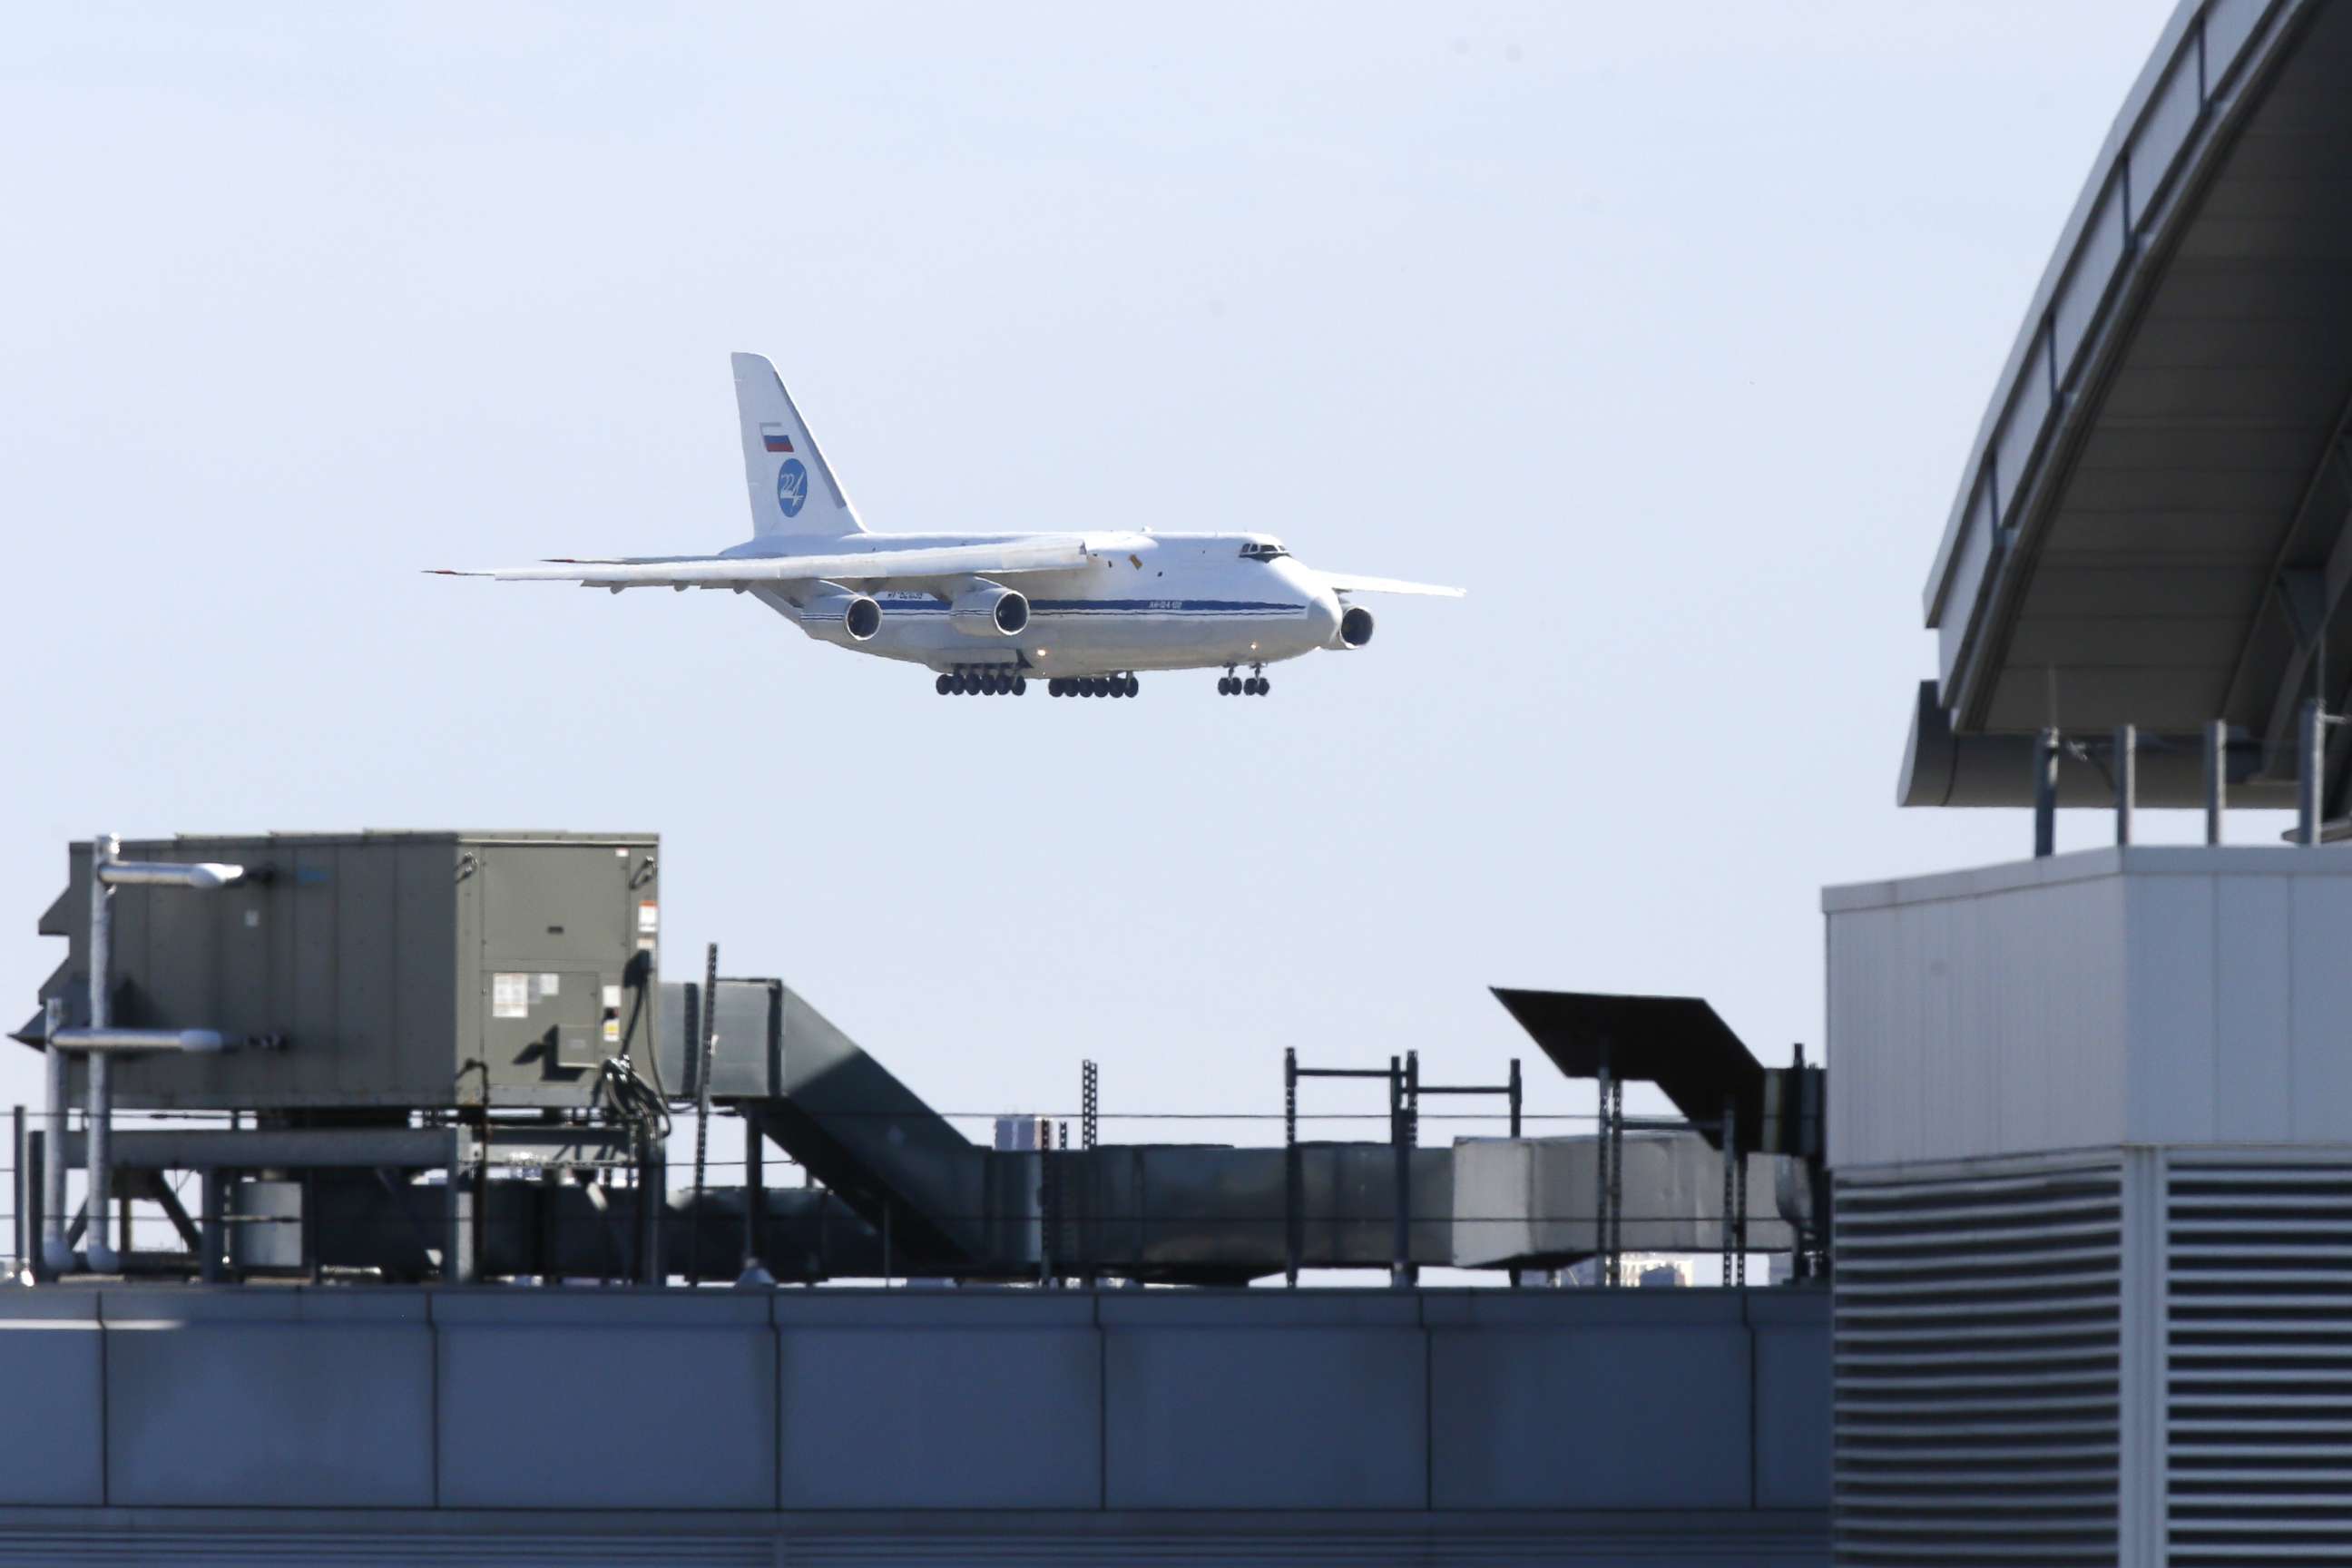 PHOTO: A Russian military transport plane carrying medical equipment, masks and supplies lands at JFK International Airport during the outbreak of the coronavirus disease in New York, April 1, 2020.